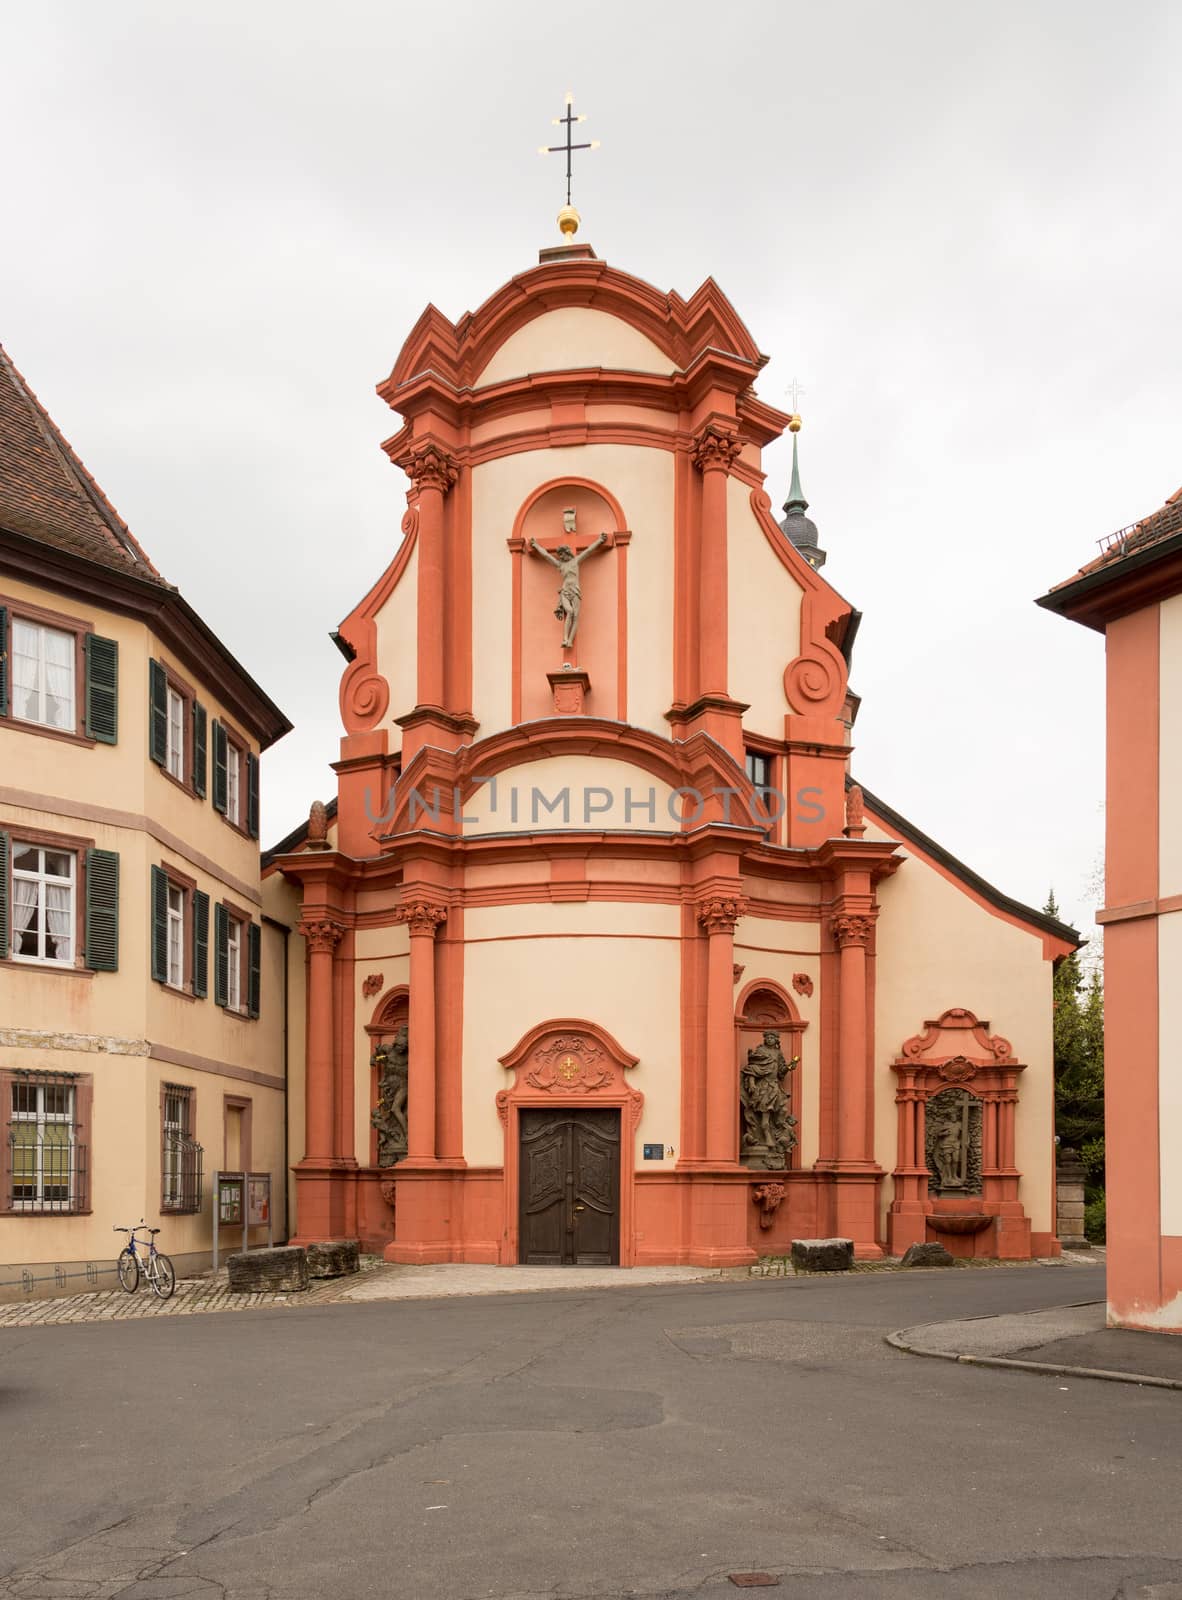 Exterior of monastery parish church in ancient town of Gerlachsheim in Germany